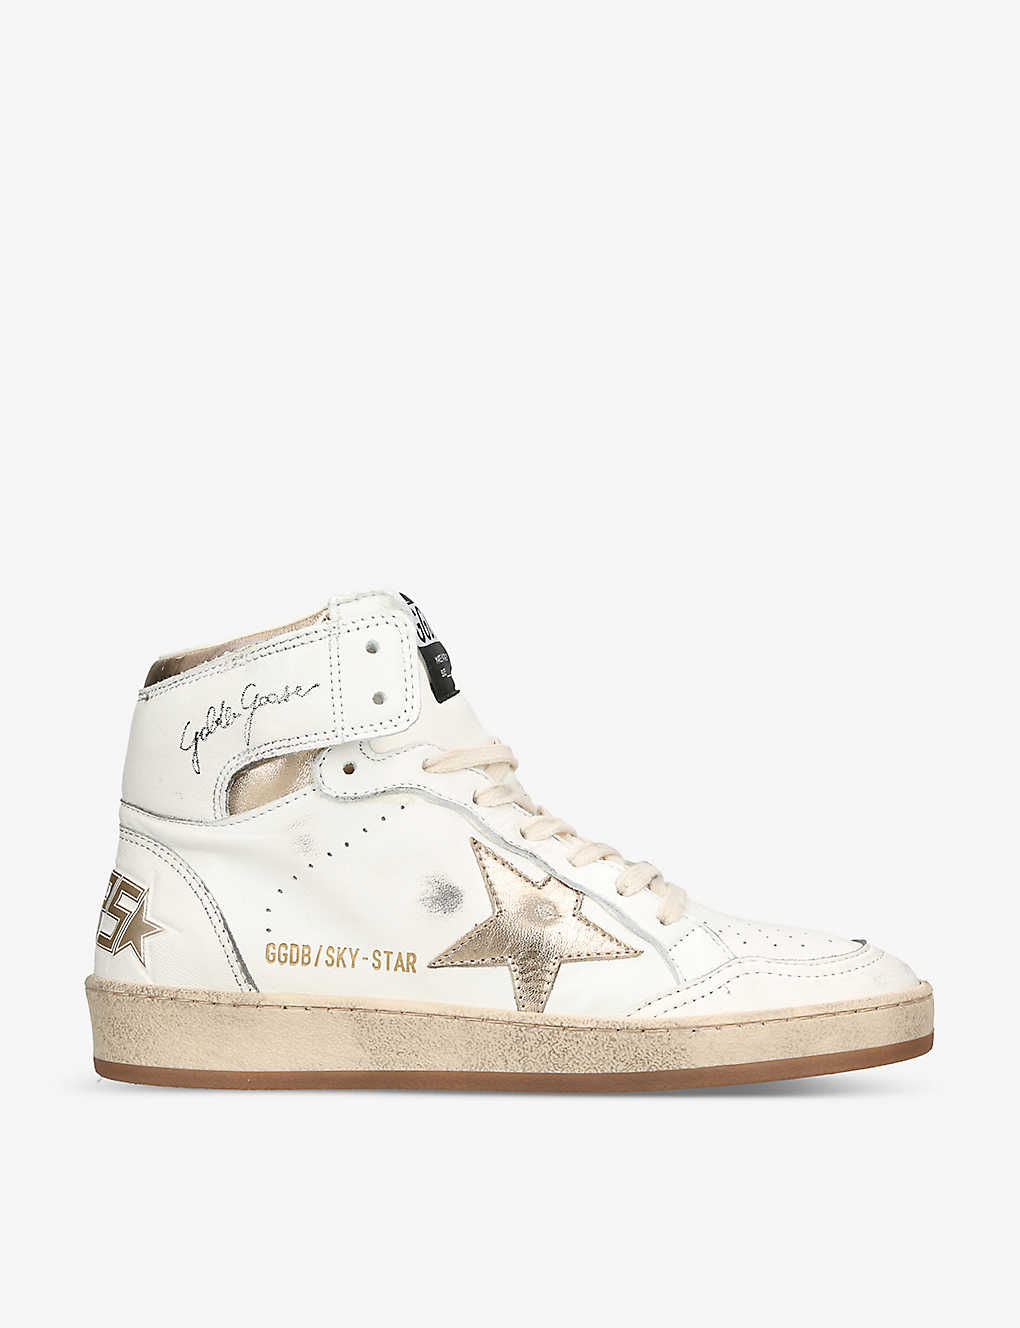 Golden Goose Women's White Women's Sky Star 11522 Leather High-top Trainers